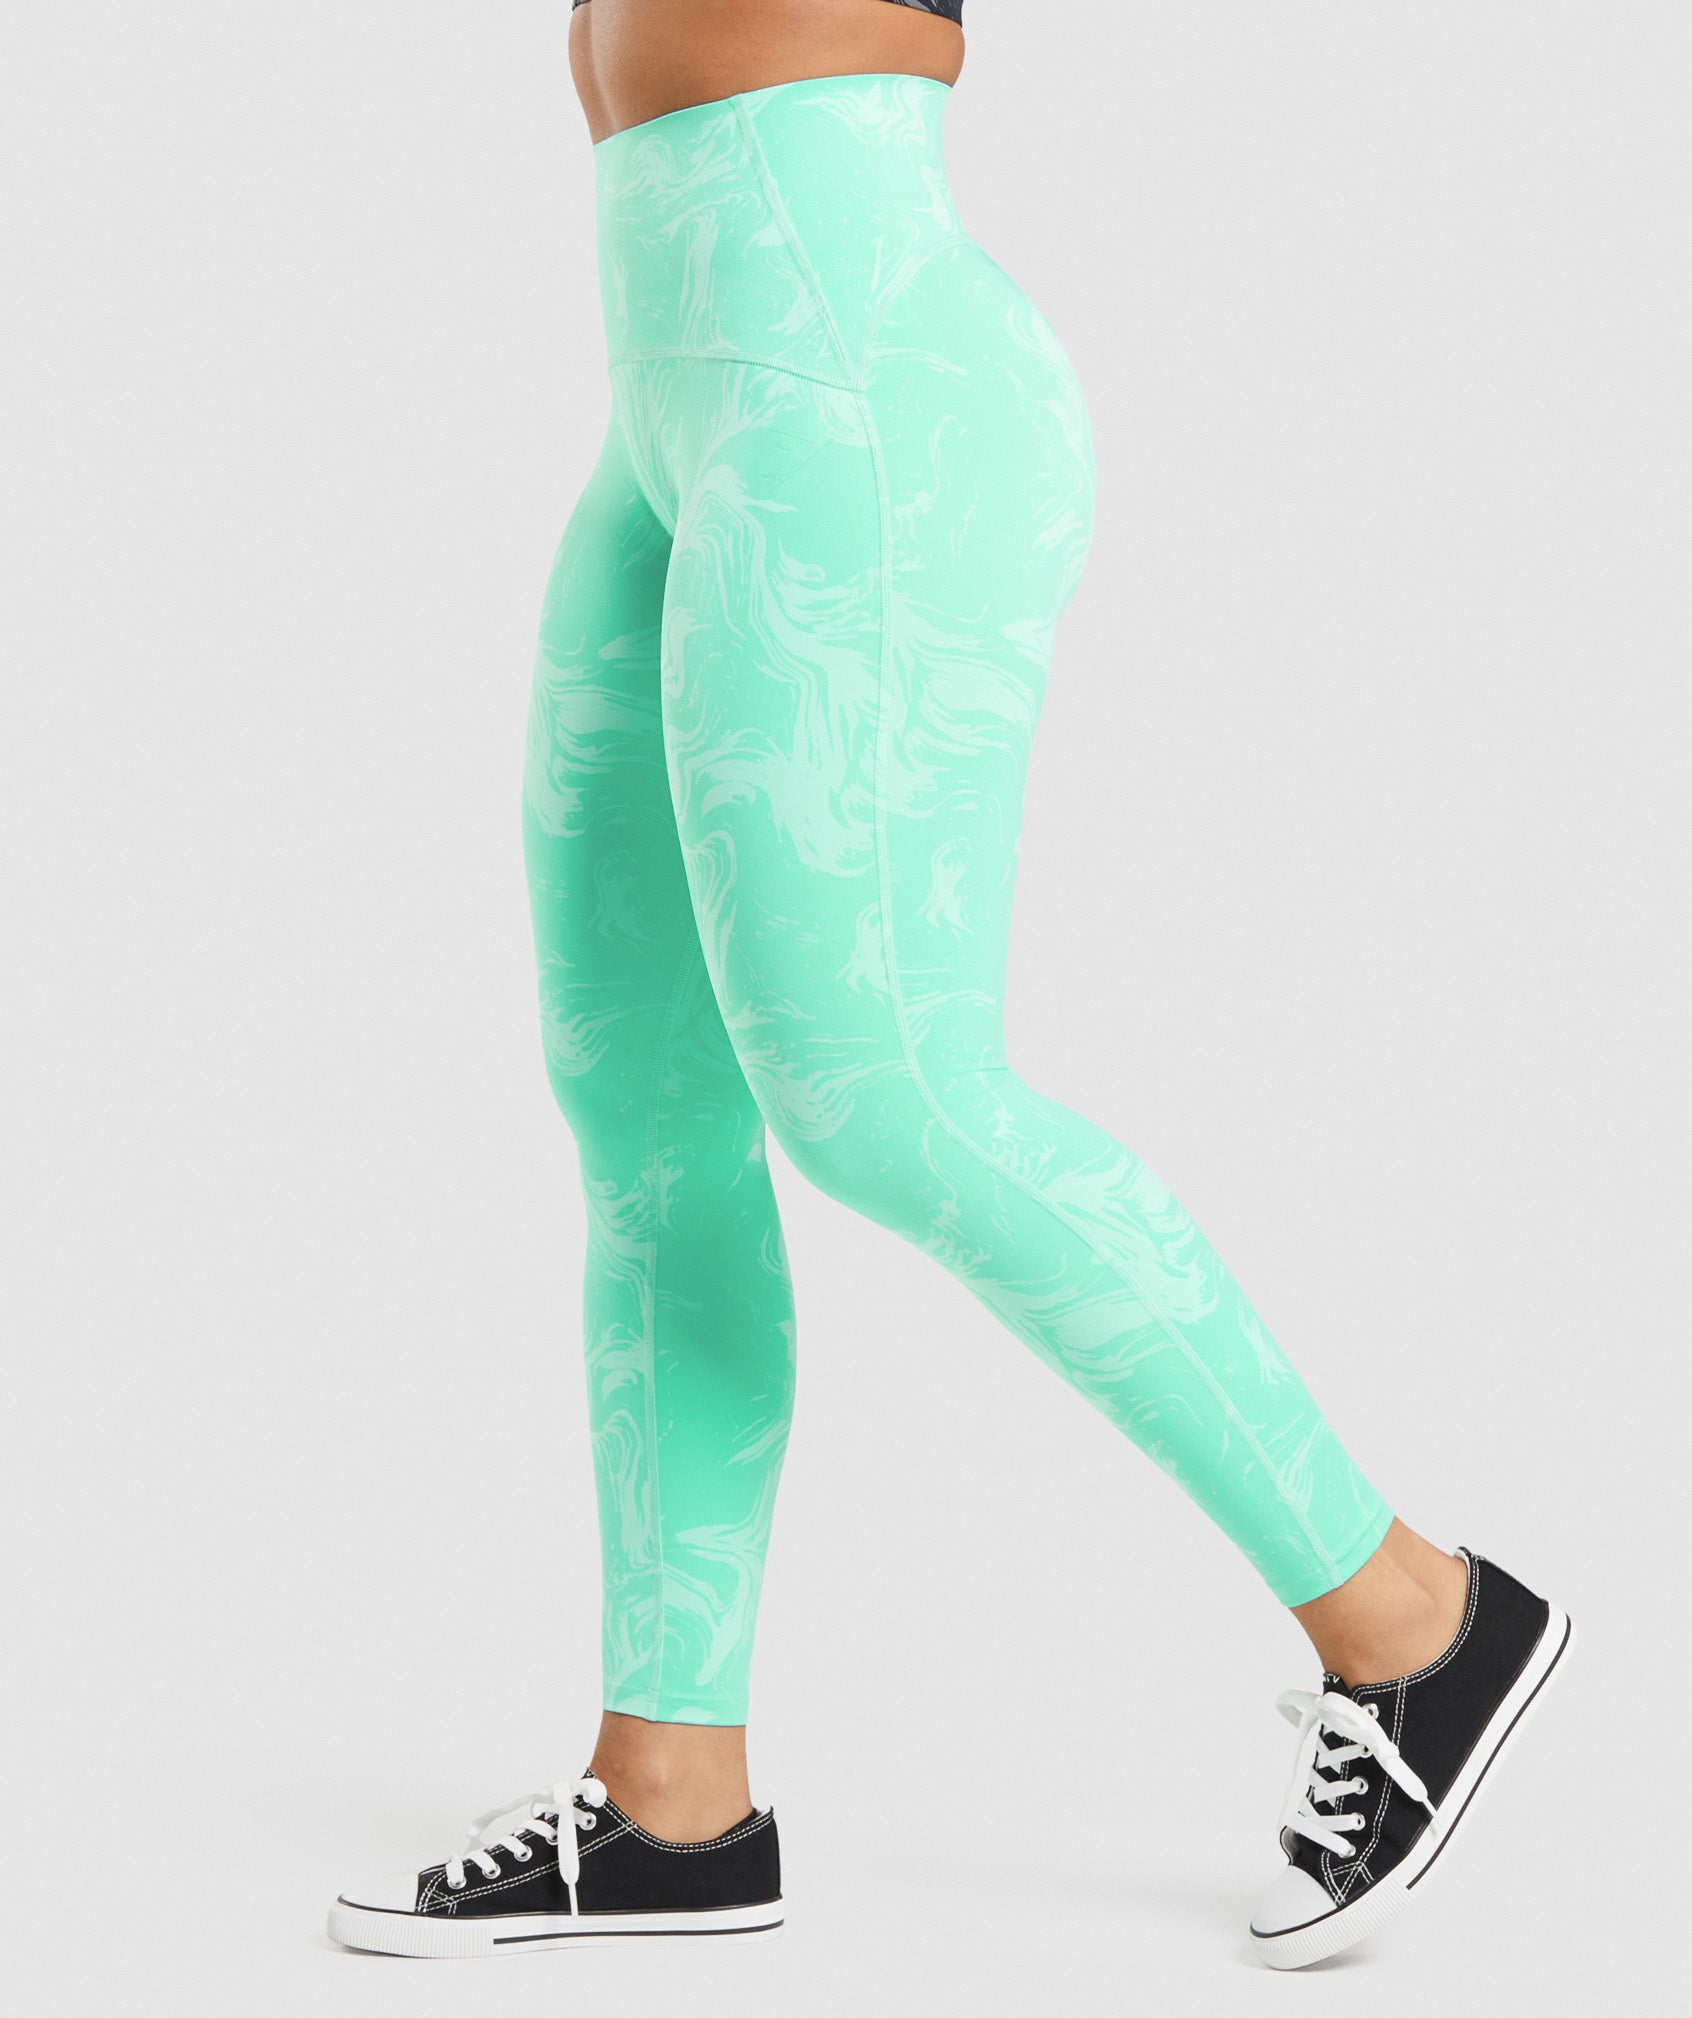 Waist Support Leggings in Bright Turquoise Print